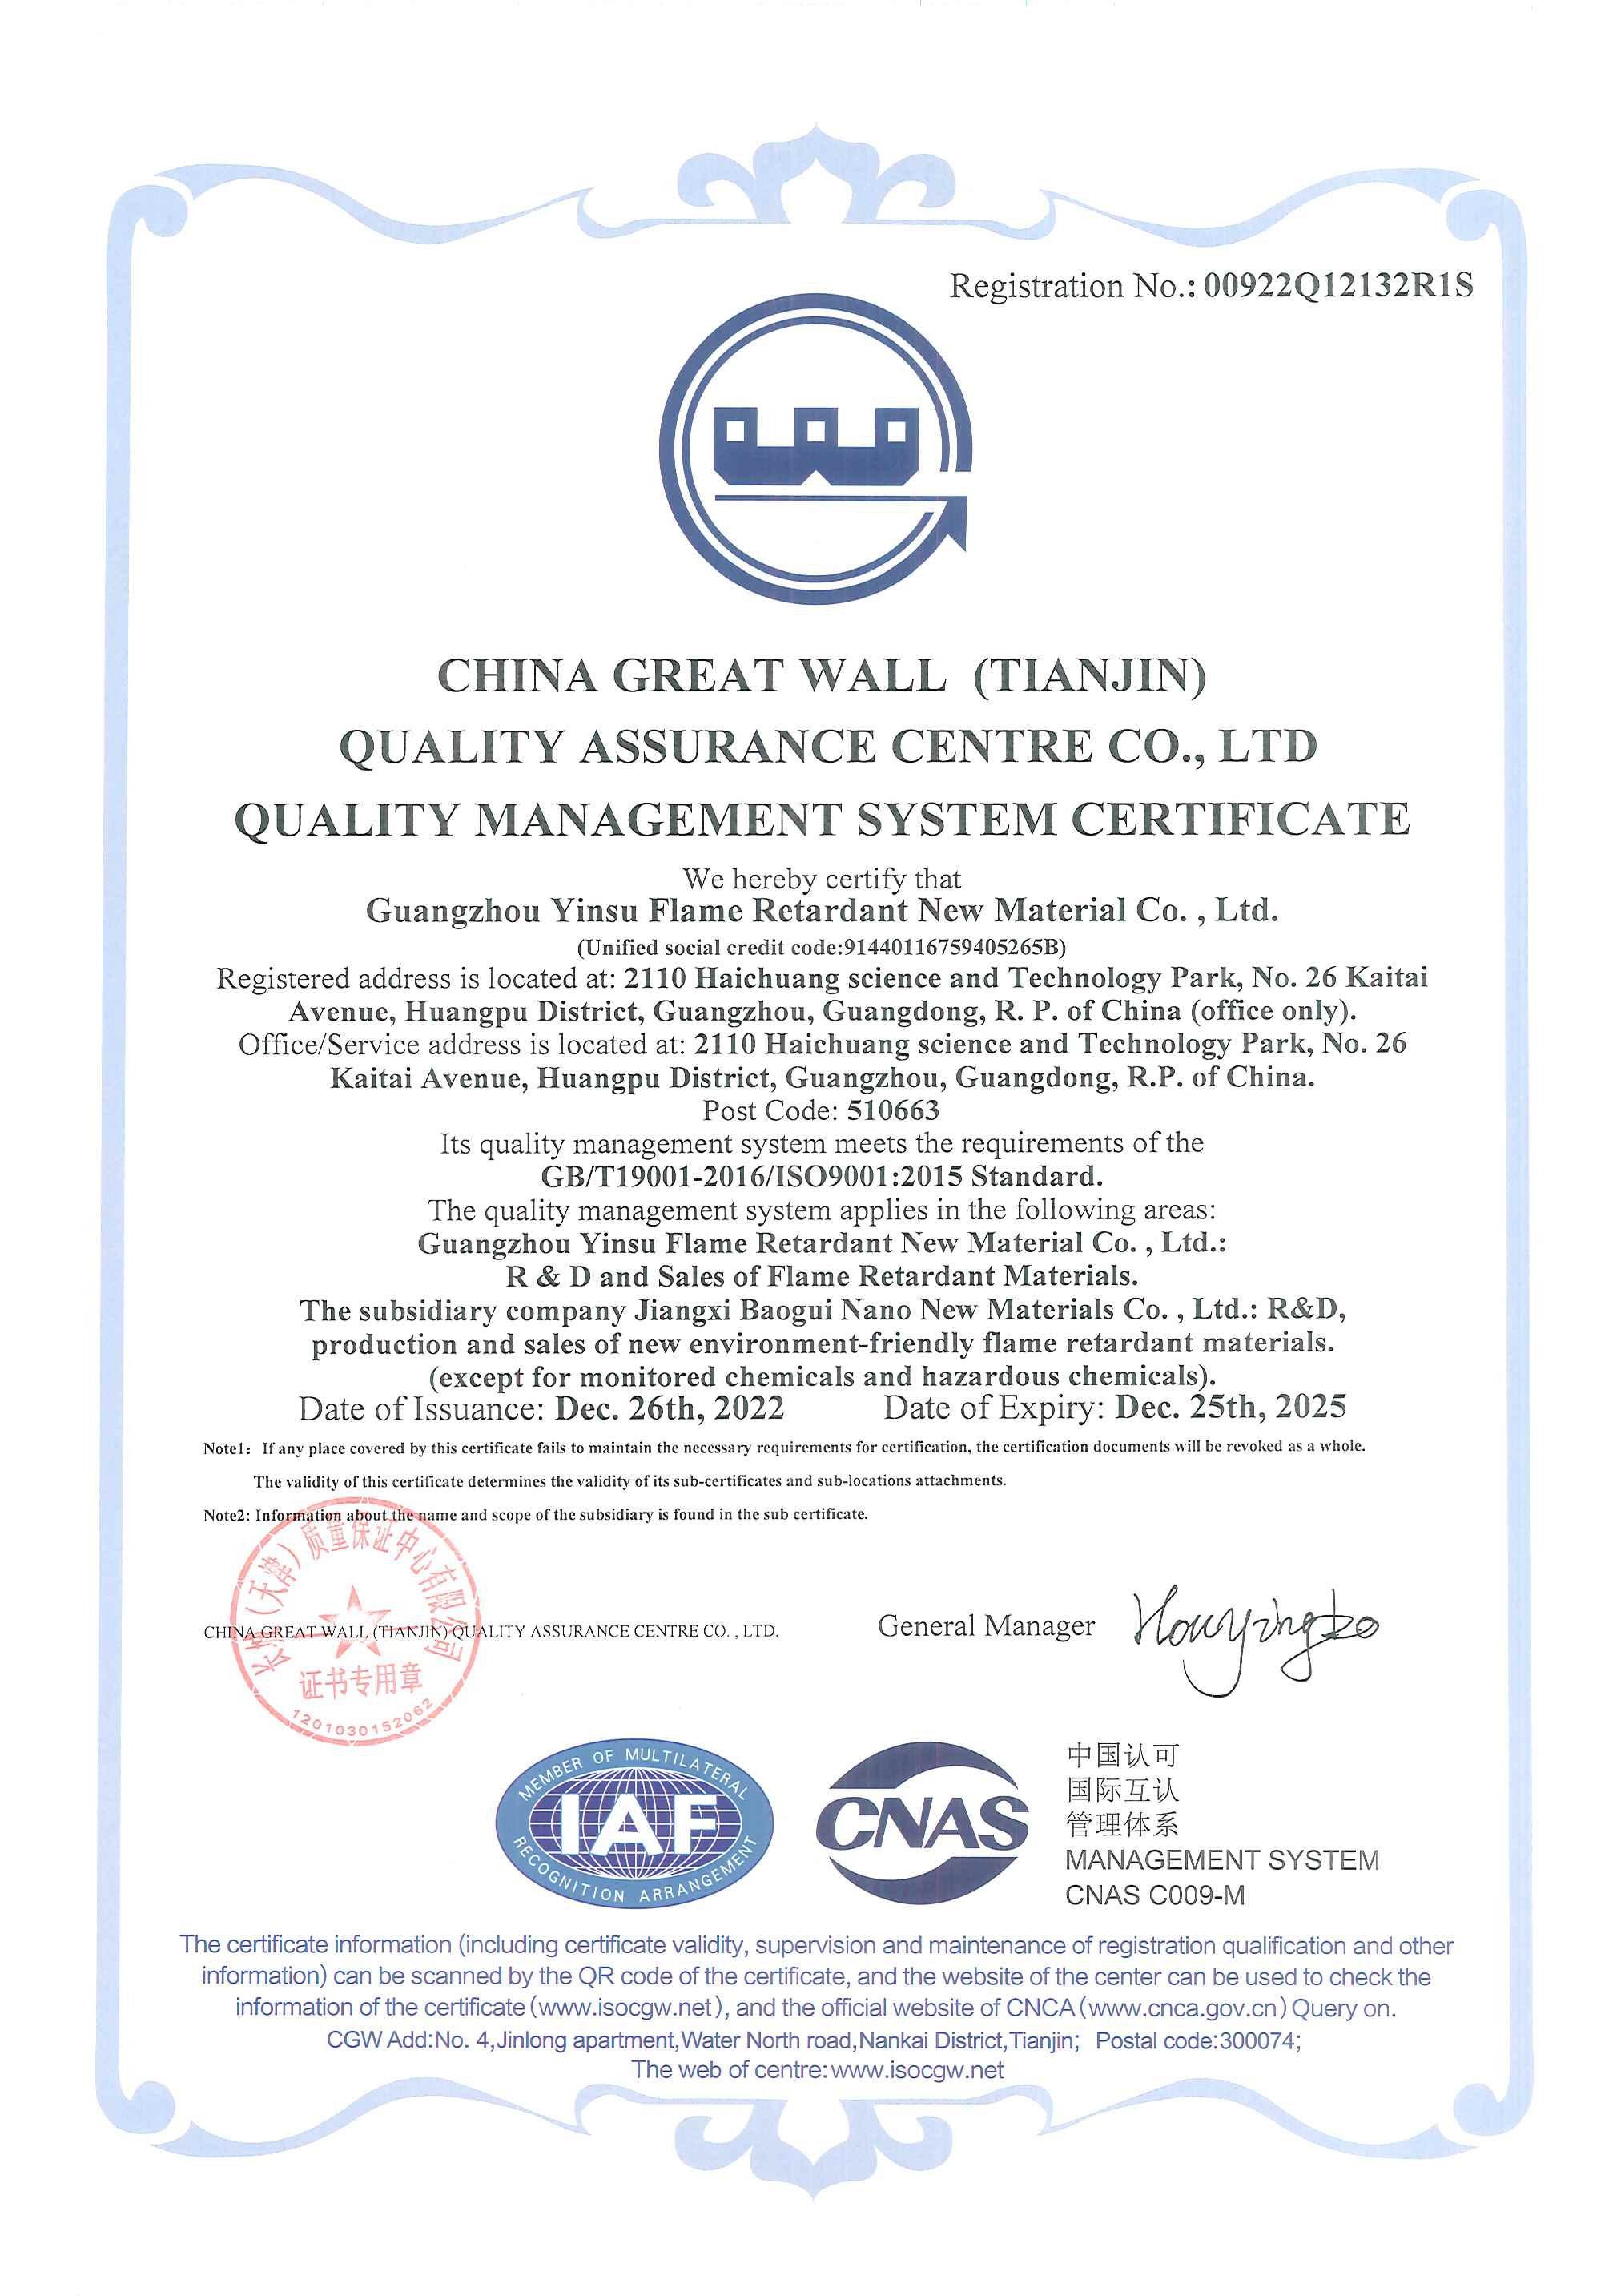 Congratulations: Yinsu Company Receives ISO9001 Certification for the Second Time: A Mark of Excellence in Quality Management.